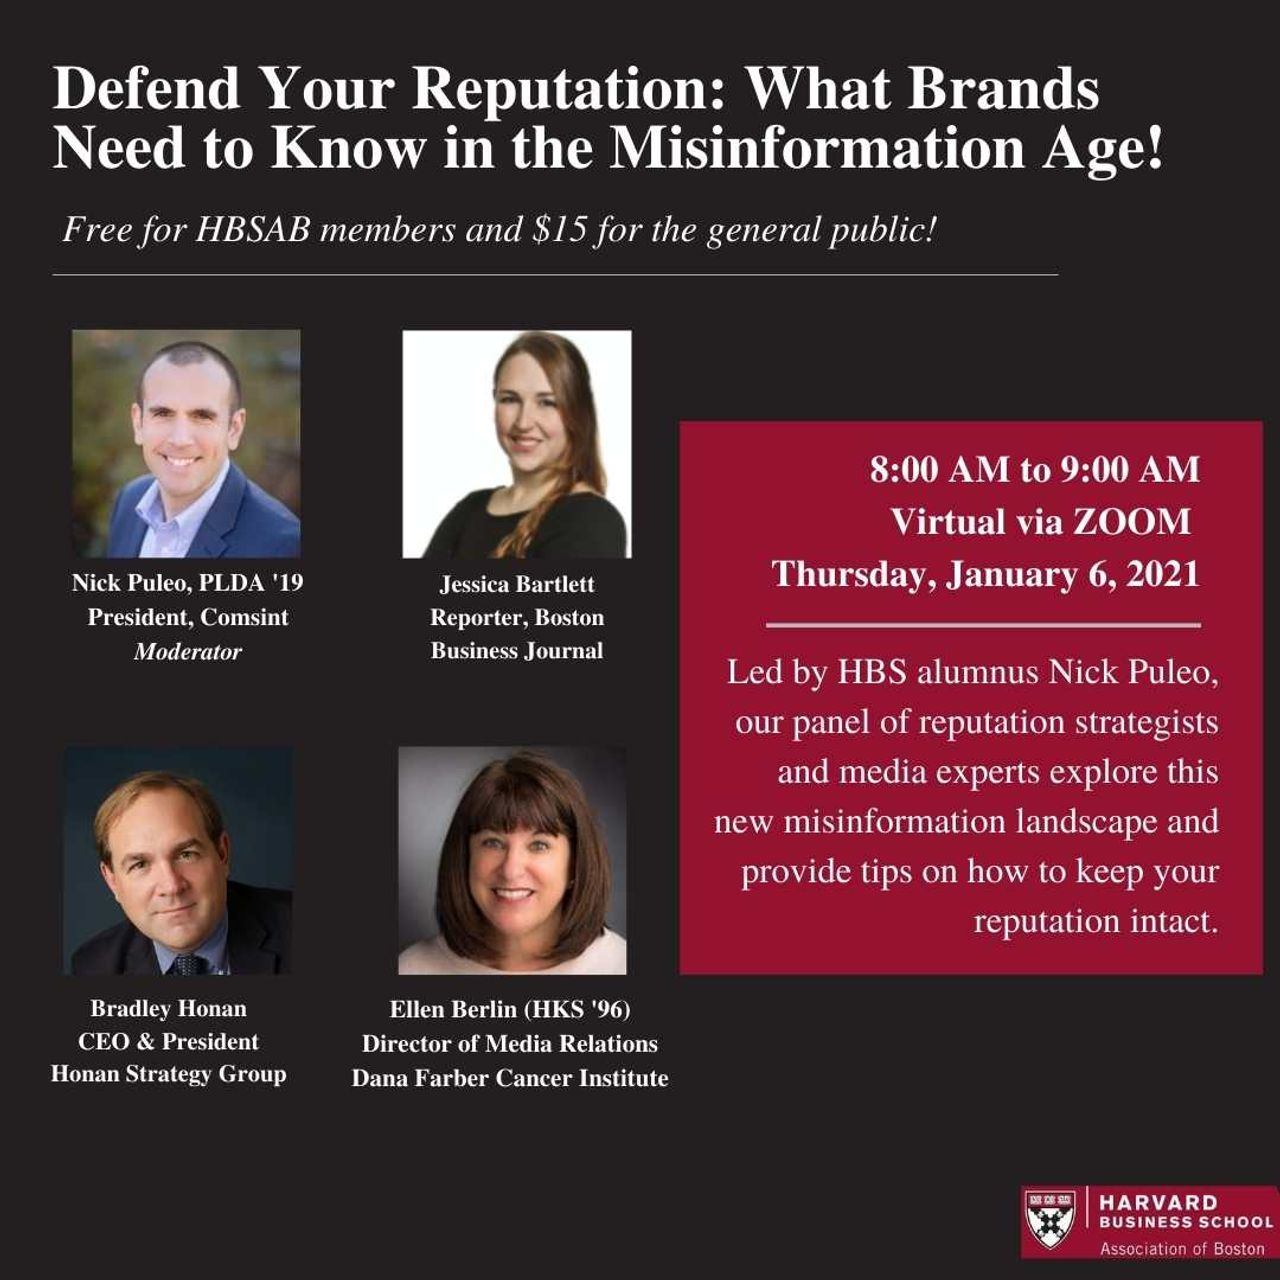 Bradley Honan joins Harvard Business School panel on Building and Protecting Corporate Reputation in an Era of Misinformation